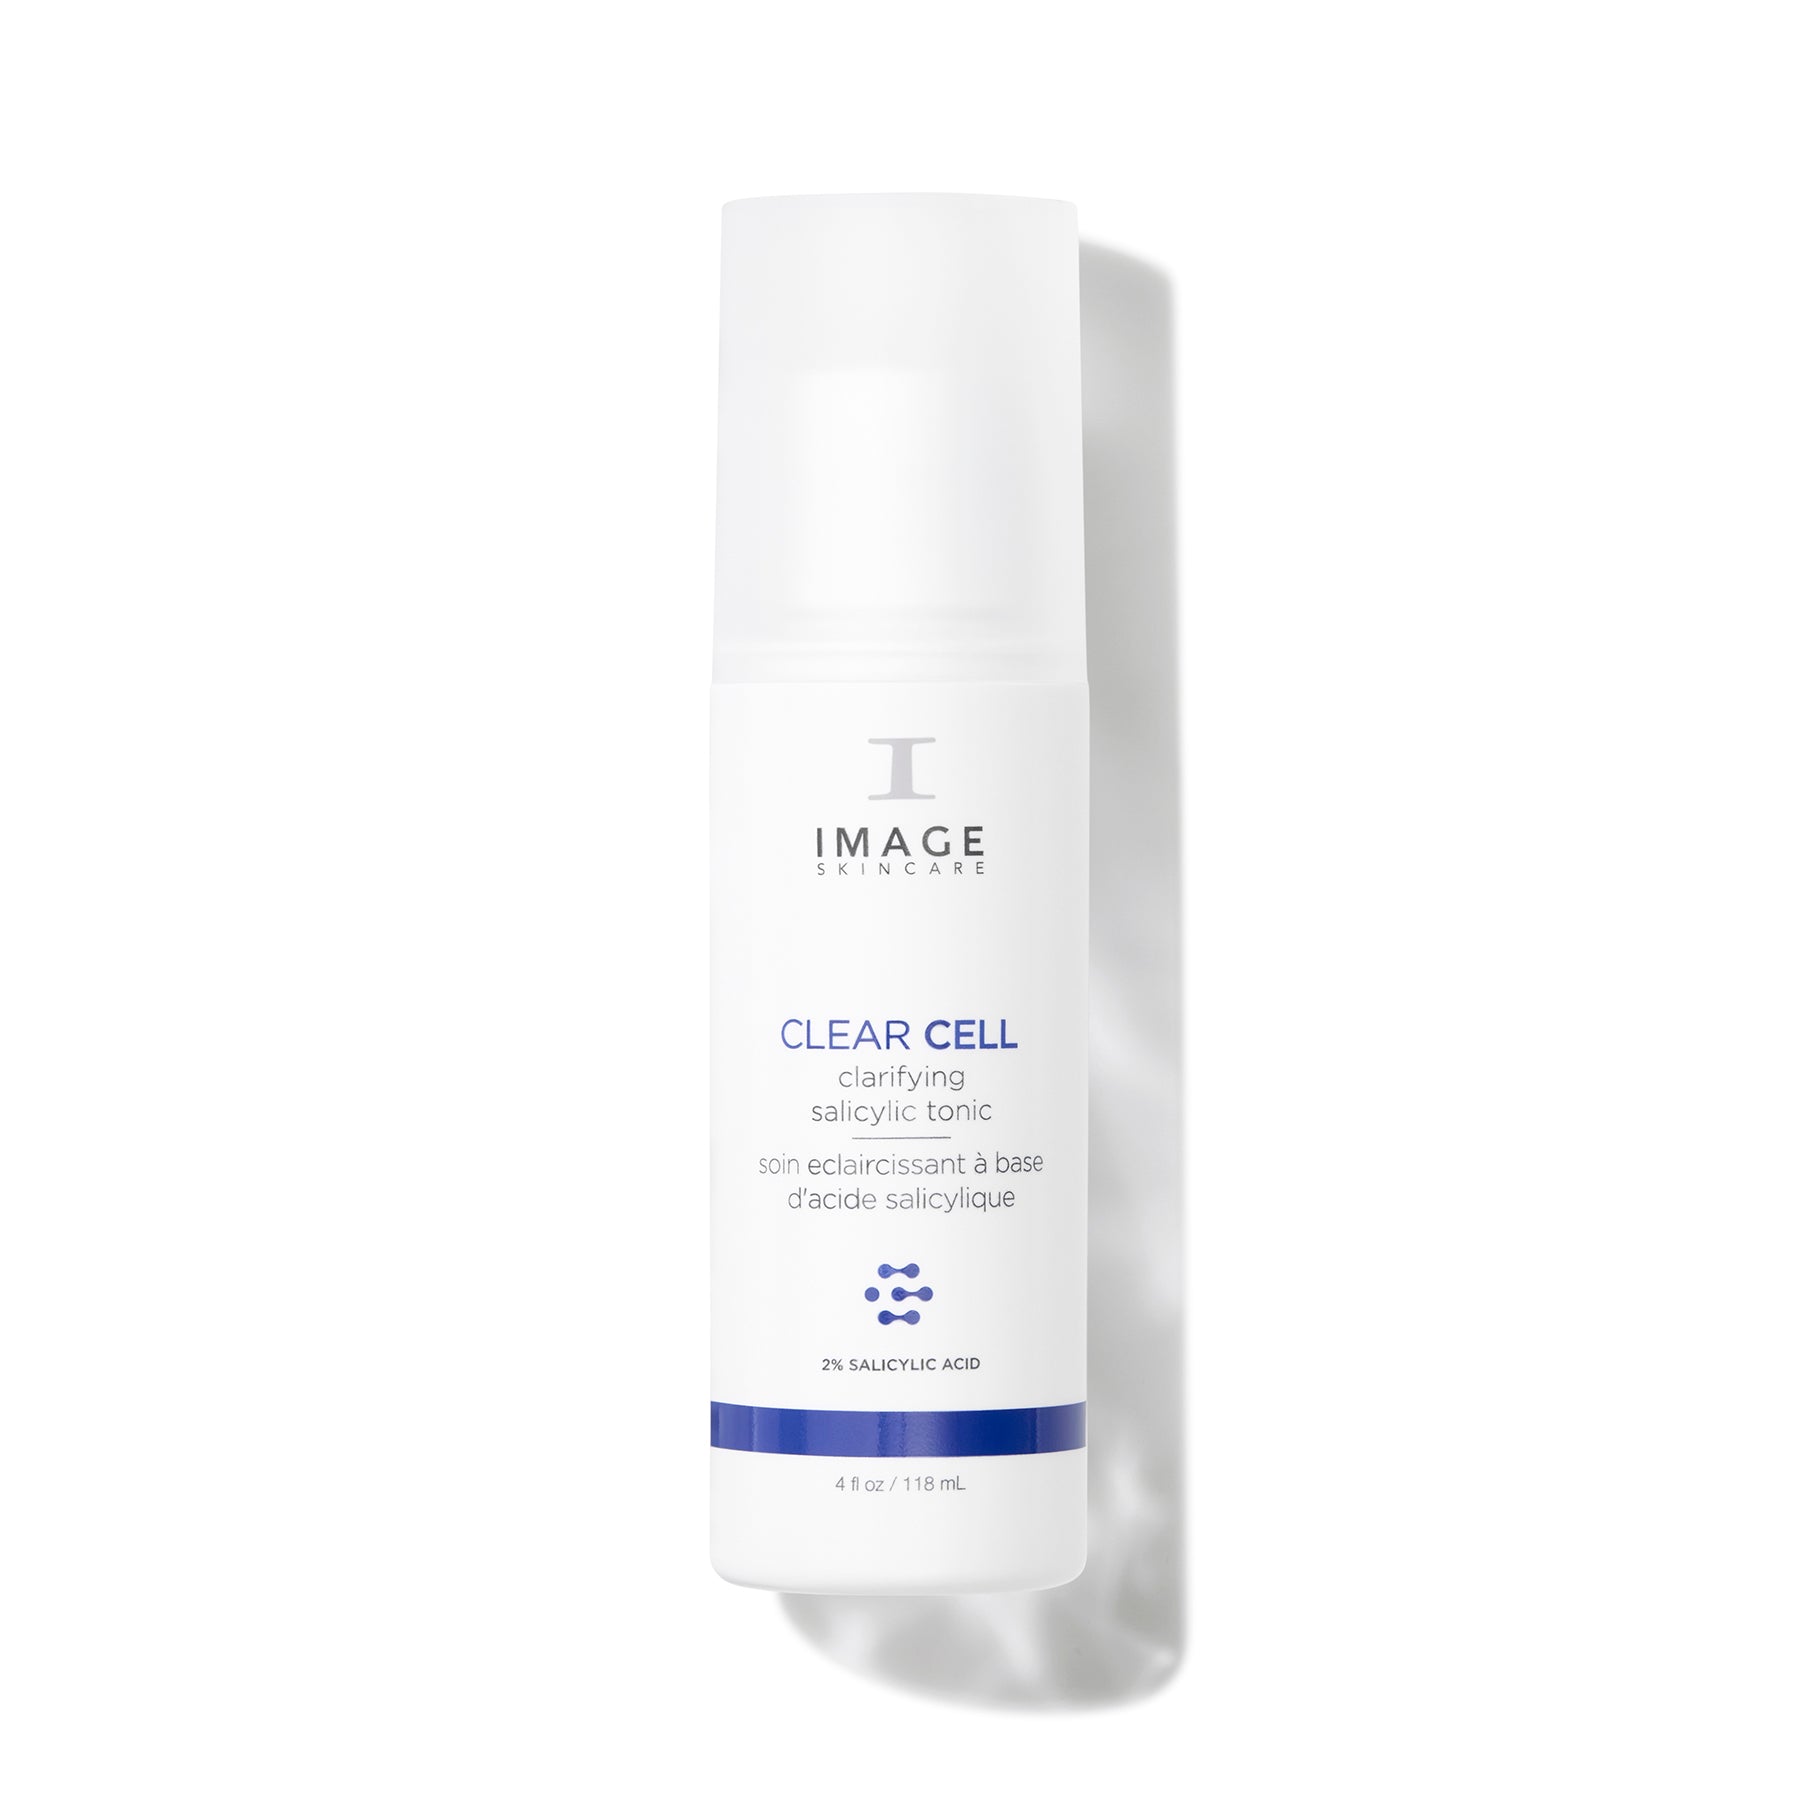 IMAGE Skincare Clear Cell Tonic